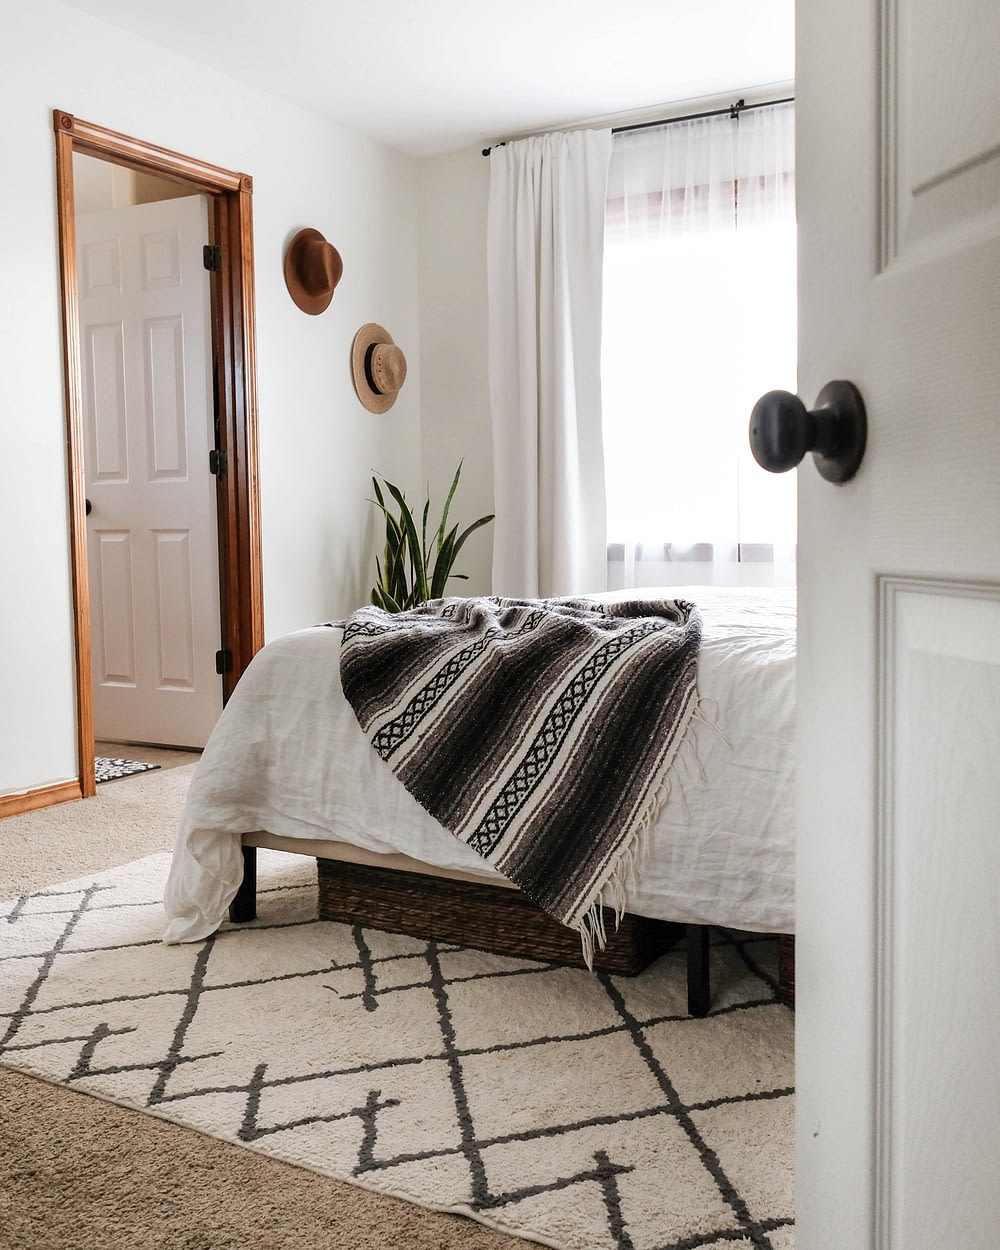 A Modern Rustic Bedroom | See how to blend two styles to create a modern rustic bedroom that is oh so cozy | Joyfully Growing Blog